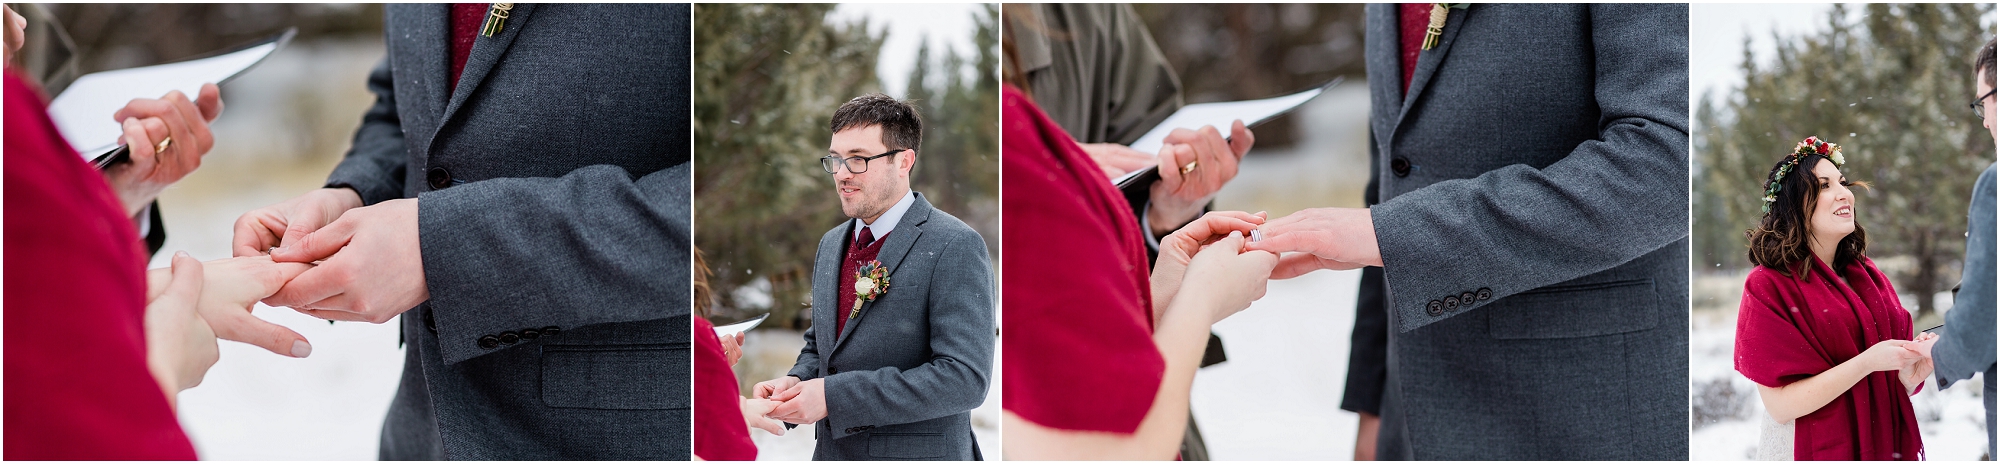 An intimate Central Oregon winter elopement near Five Pine Lodge in Sisters, Oregon. | Erica Swantek Photography